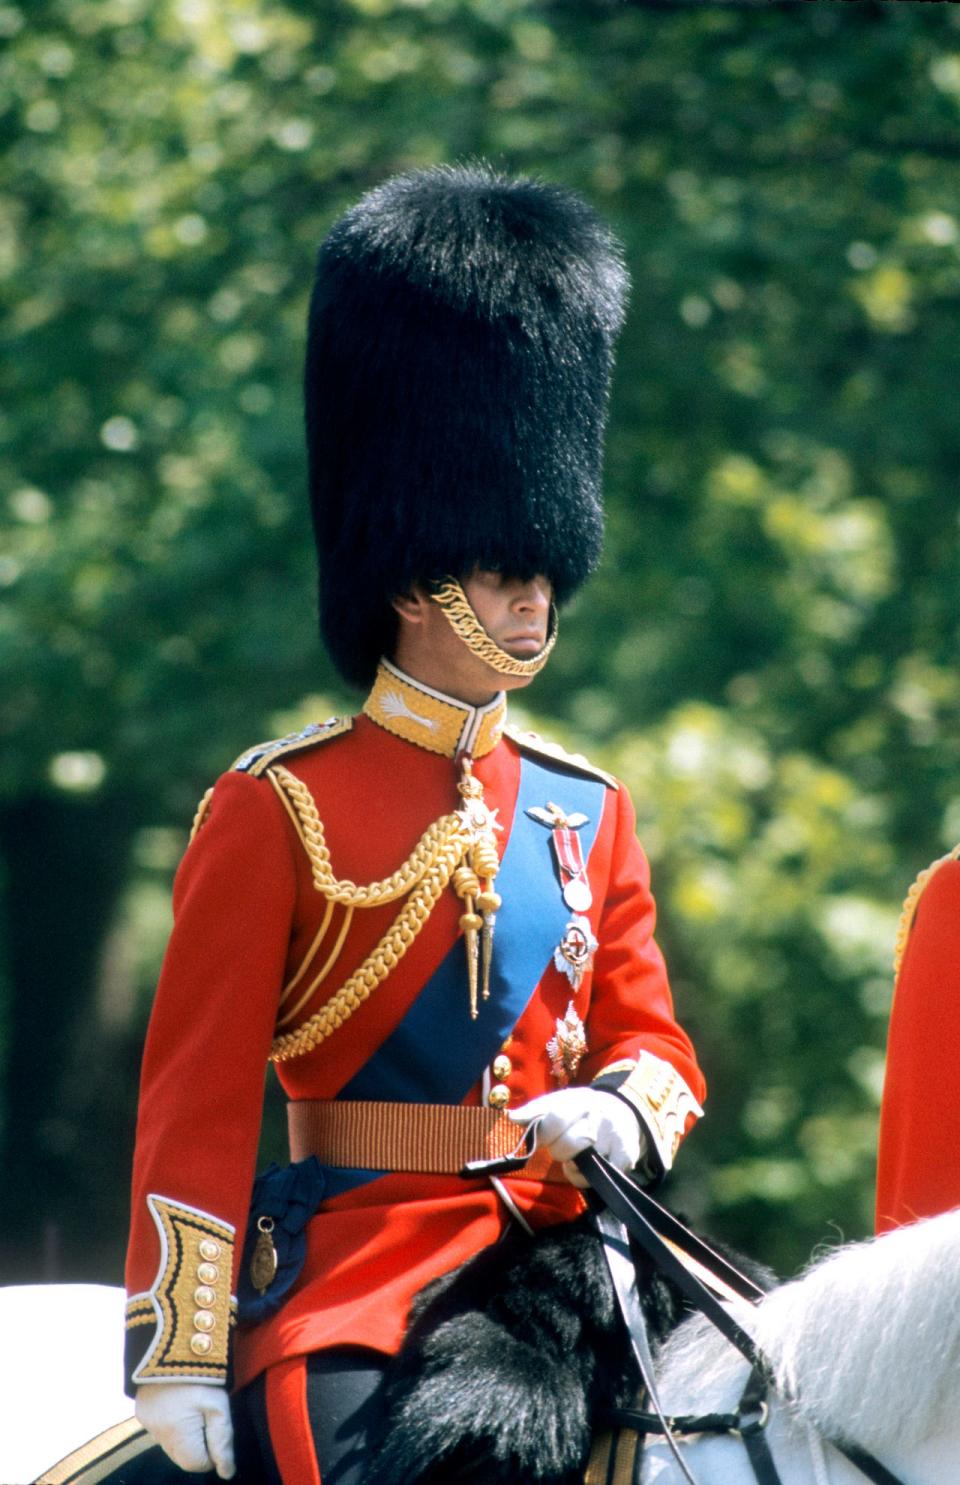 King Charles III wearing a red military uniform and a royal guard hat while riding a horse.